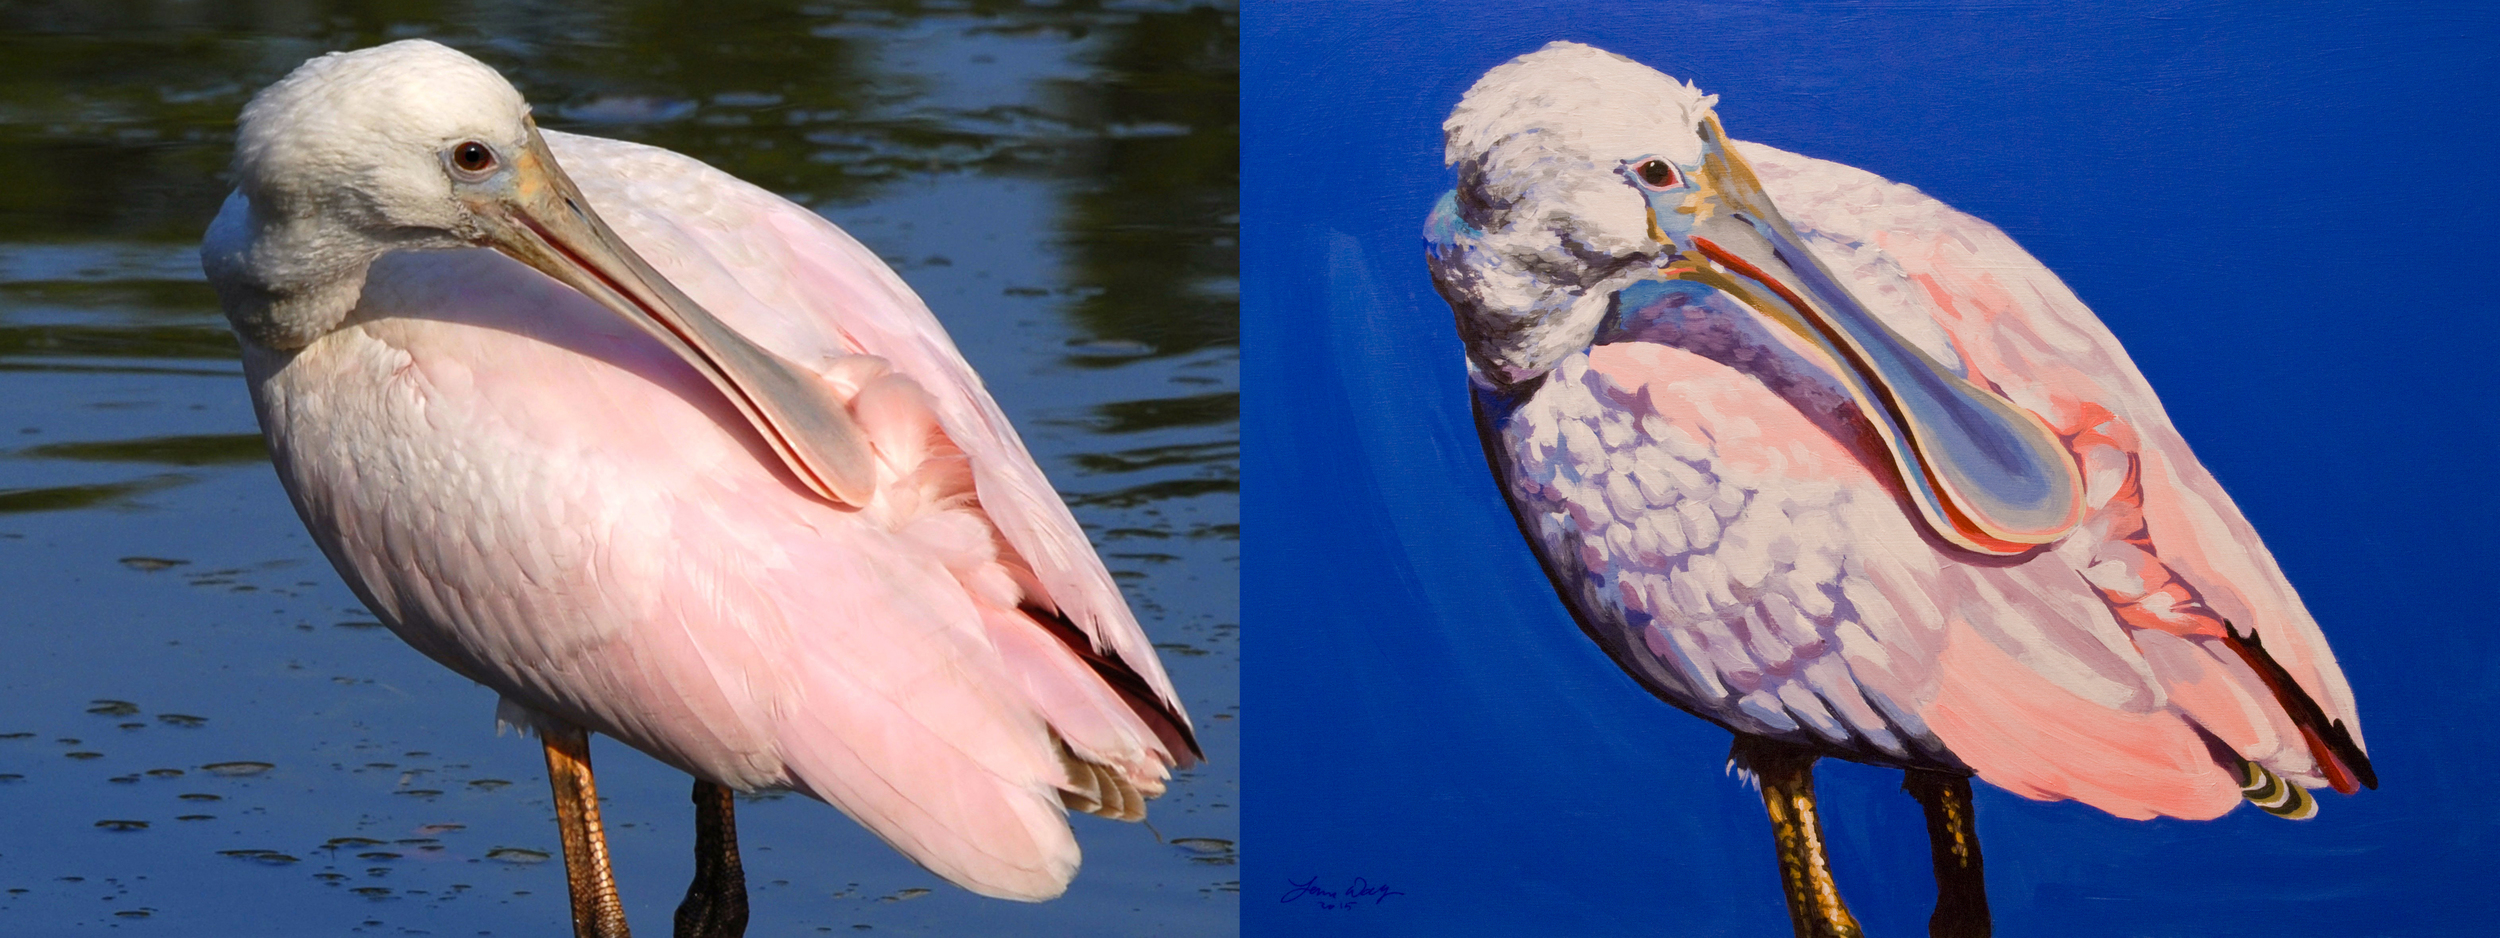 spoonbill preening before and after.jpg